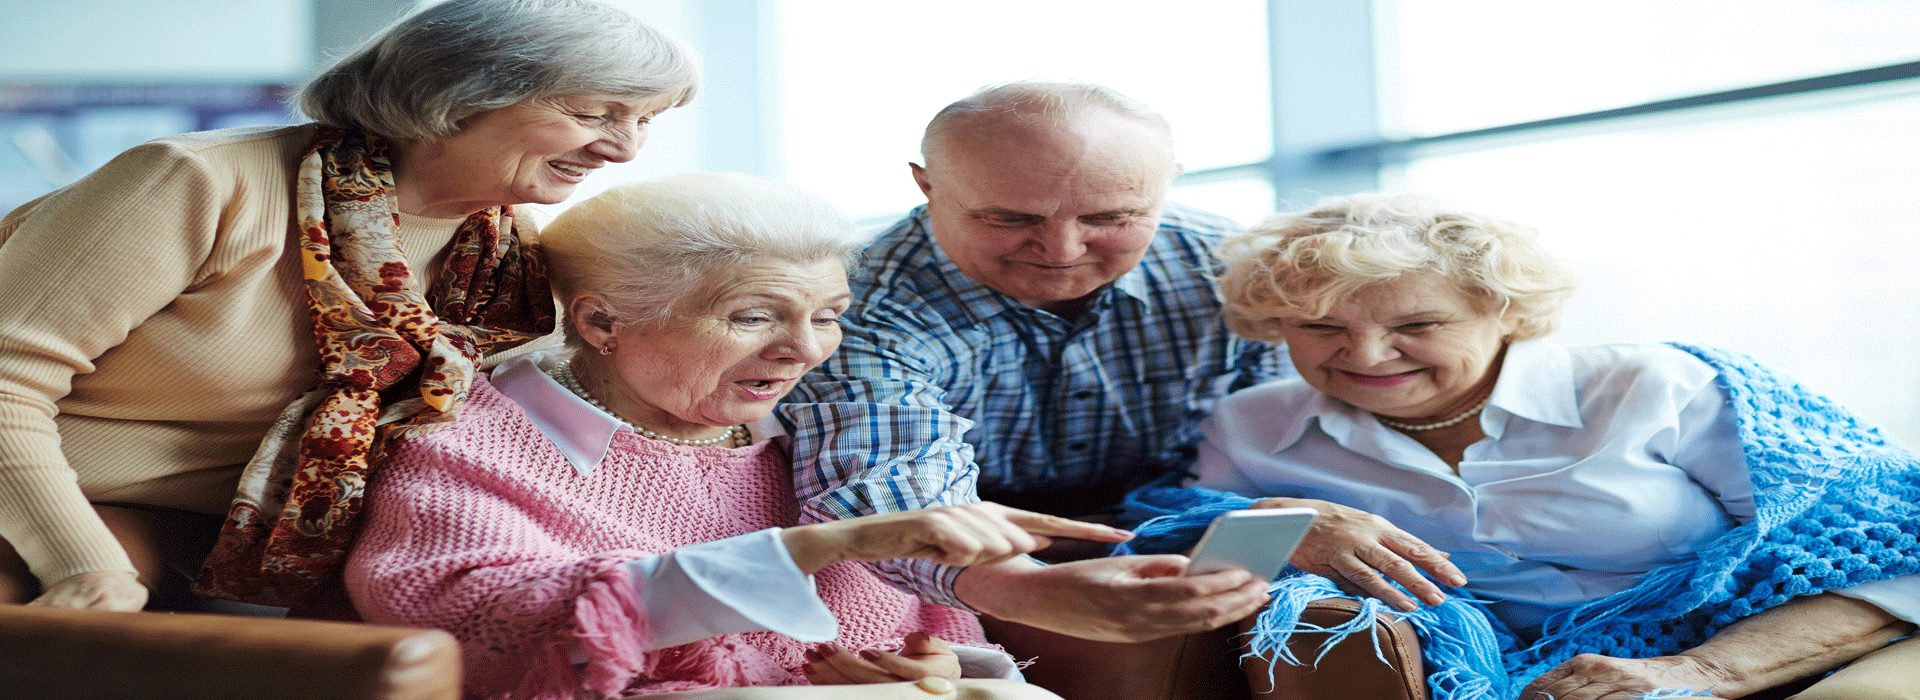 How to find Assisted live, Residential care facilities, retirement homes, and dementia care in Orange County, California